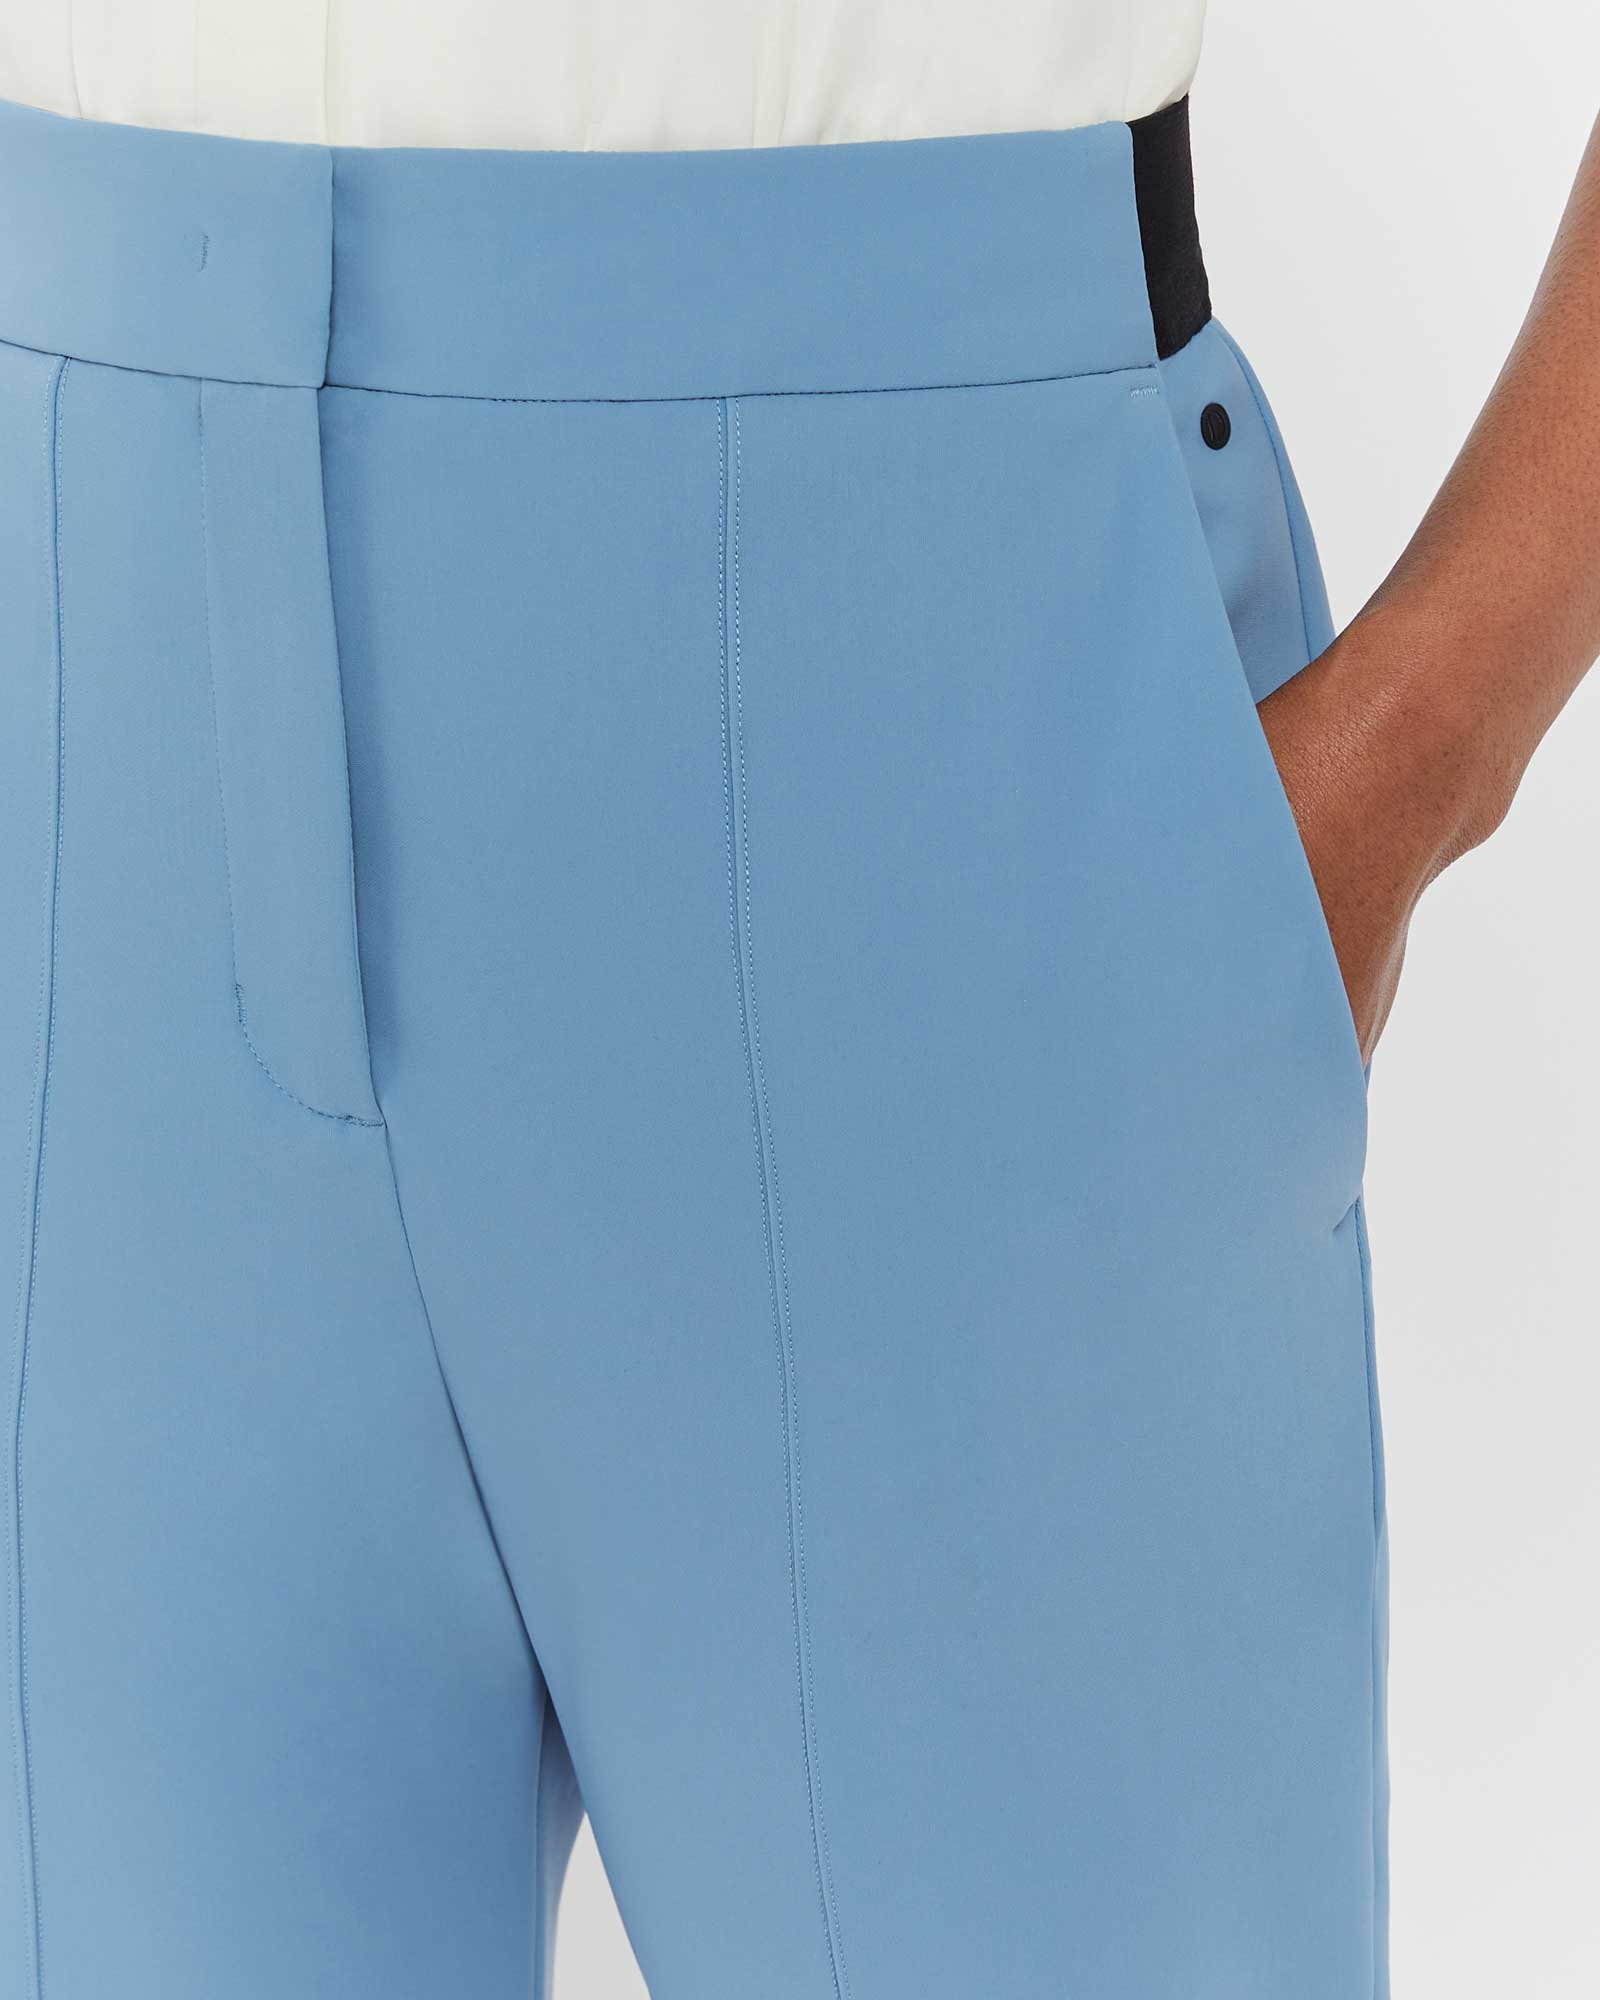 High Waisted Tailored Cigarette Trouser | boohoo